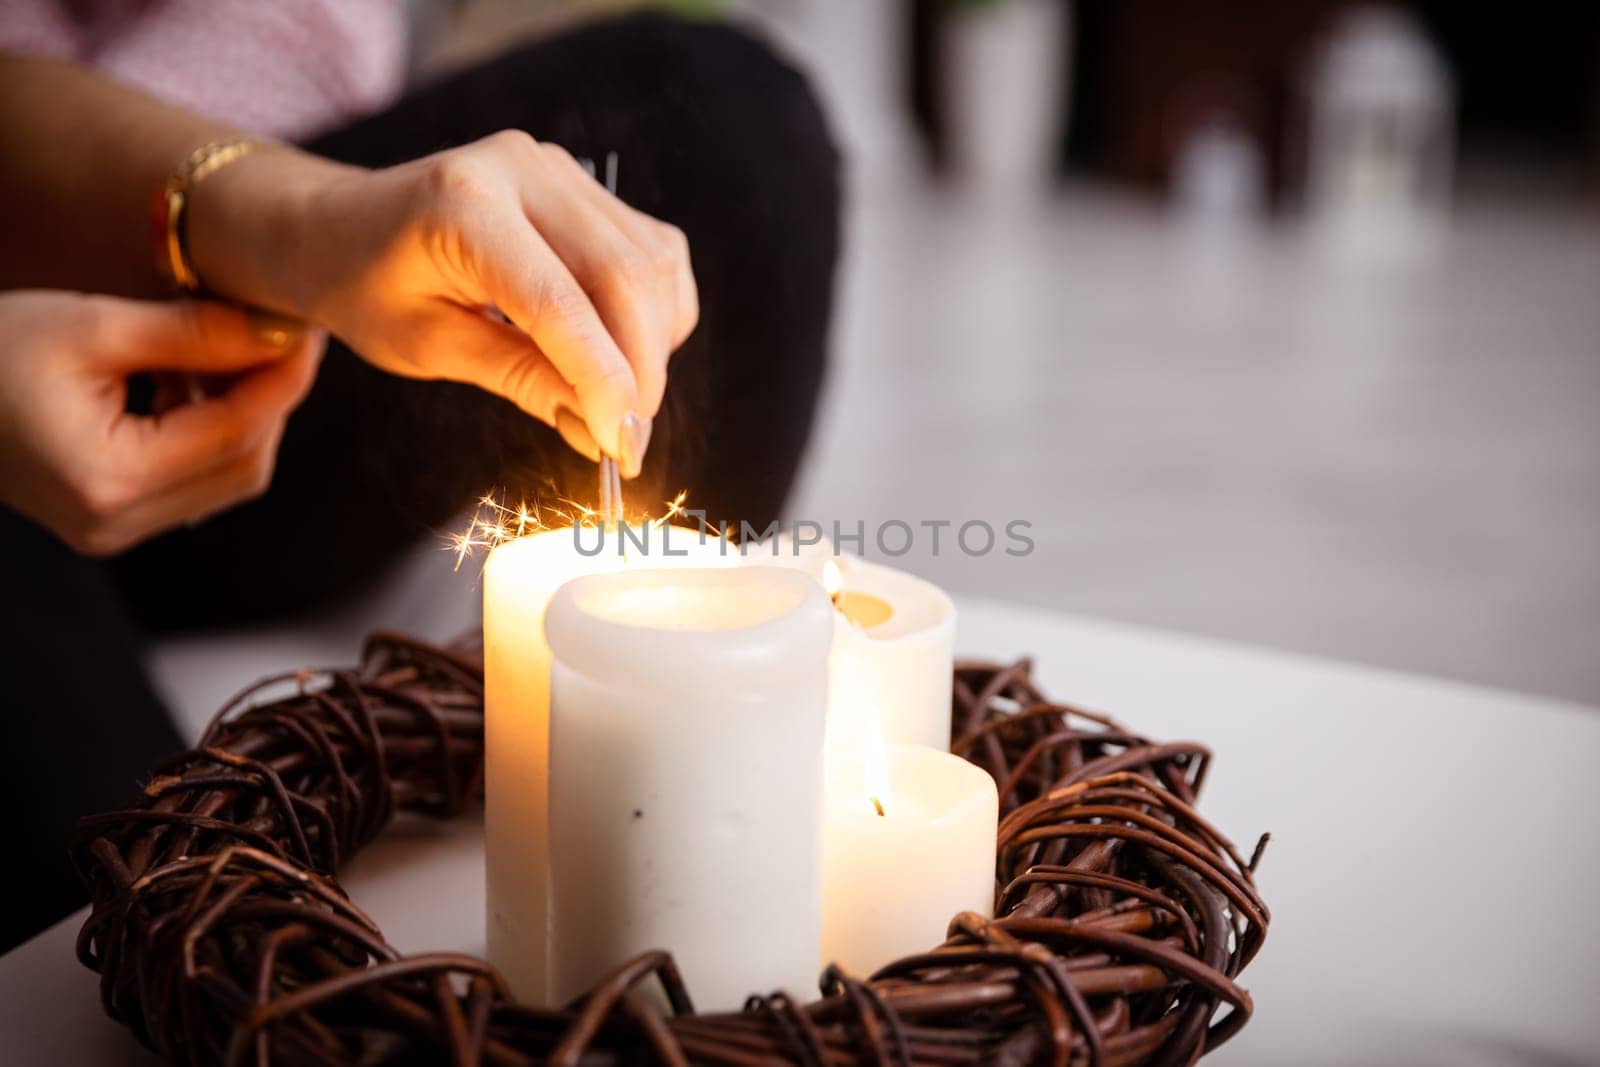 Four lit candles stand on the table as decoration and from them the girl lights fireworks. Romantic mood with burning candles.